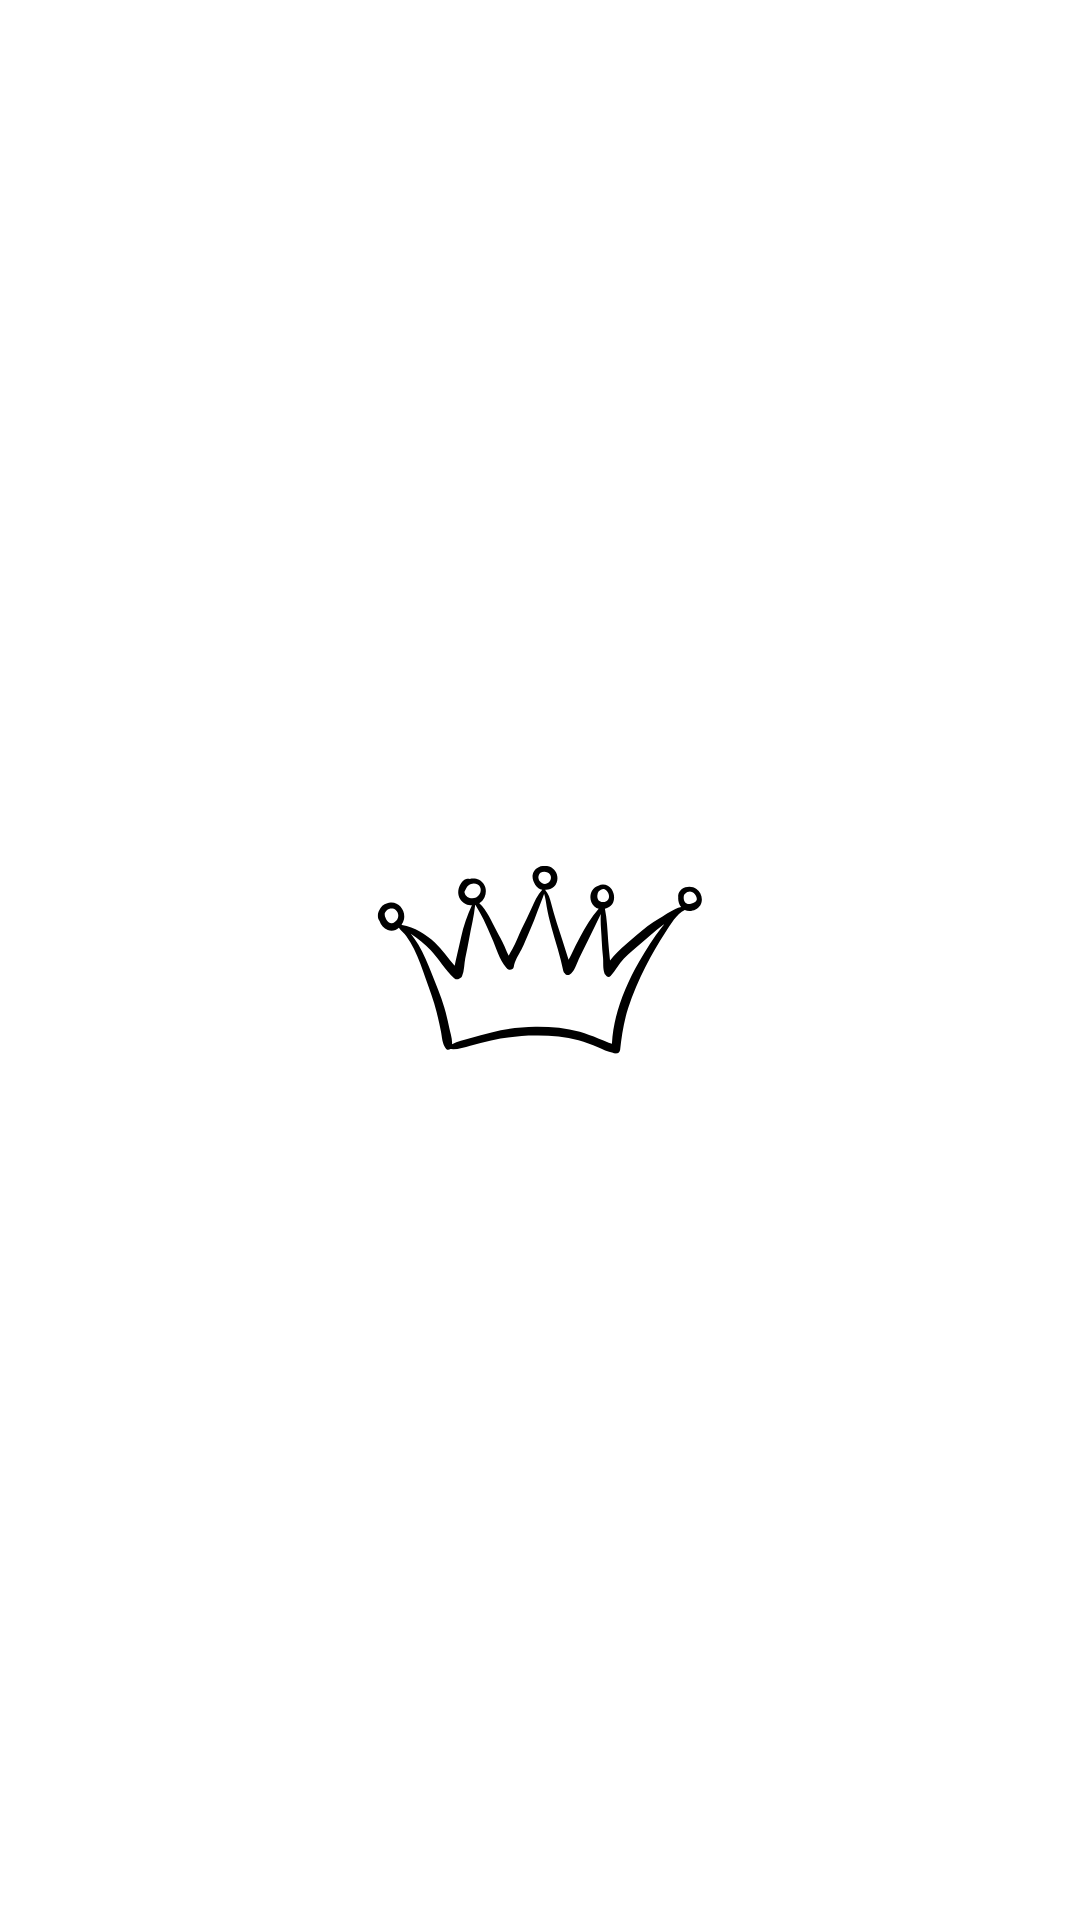 A black and white image of a crown on a white background - Crown